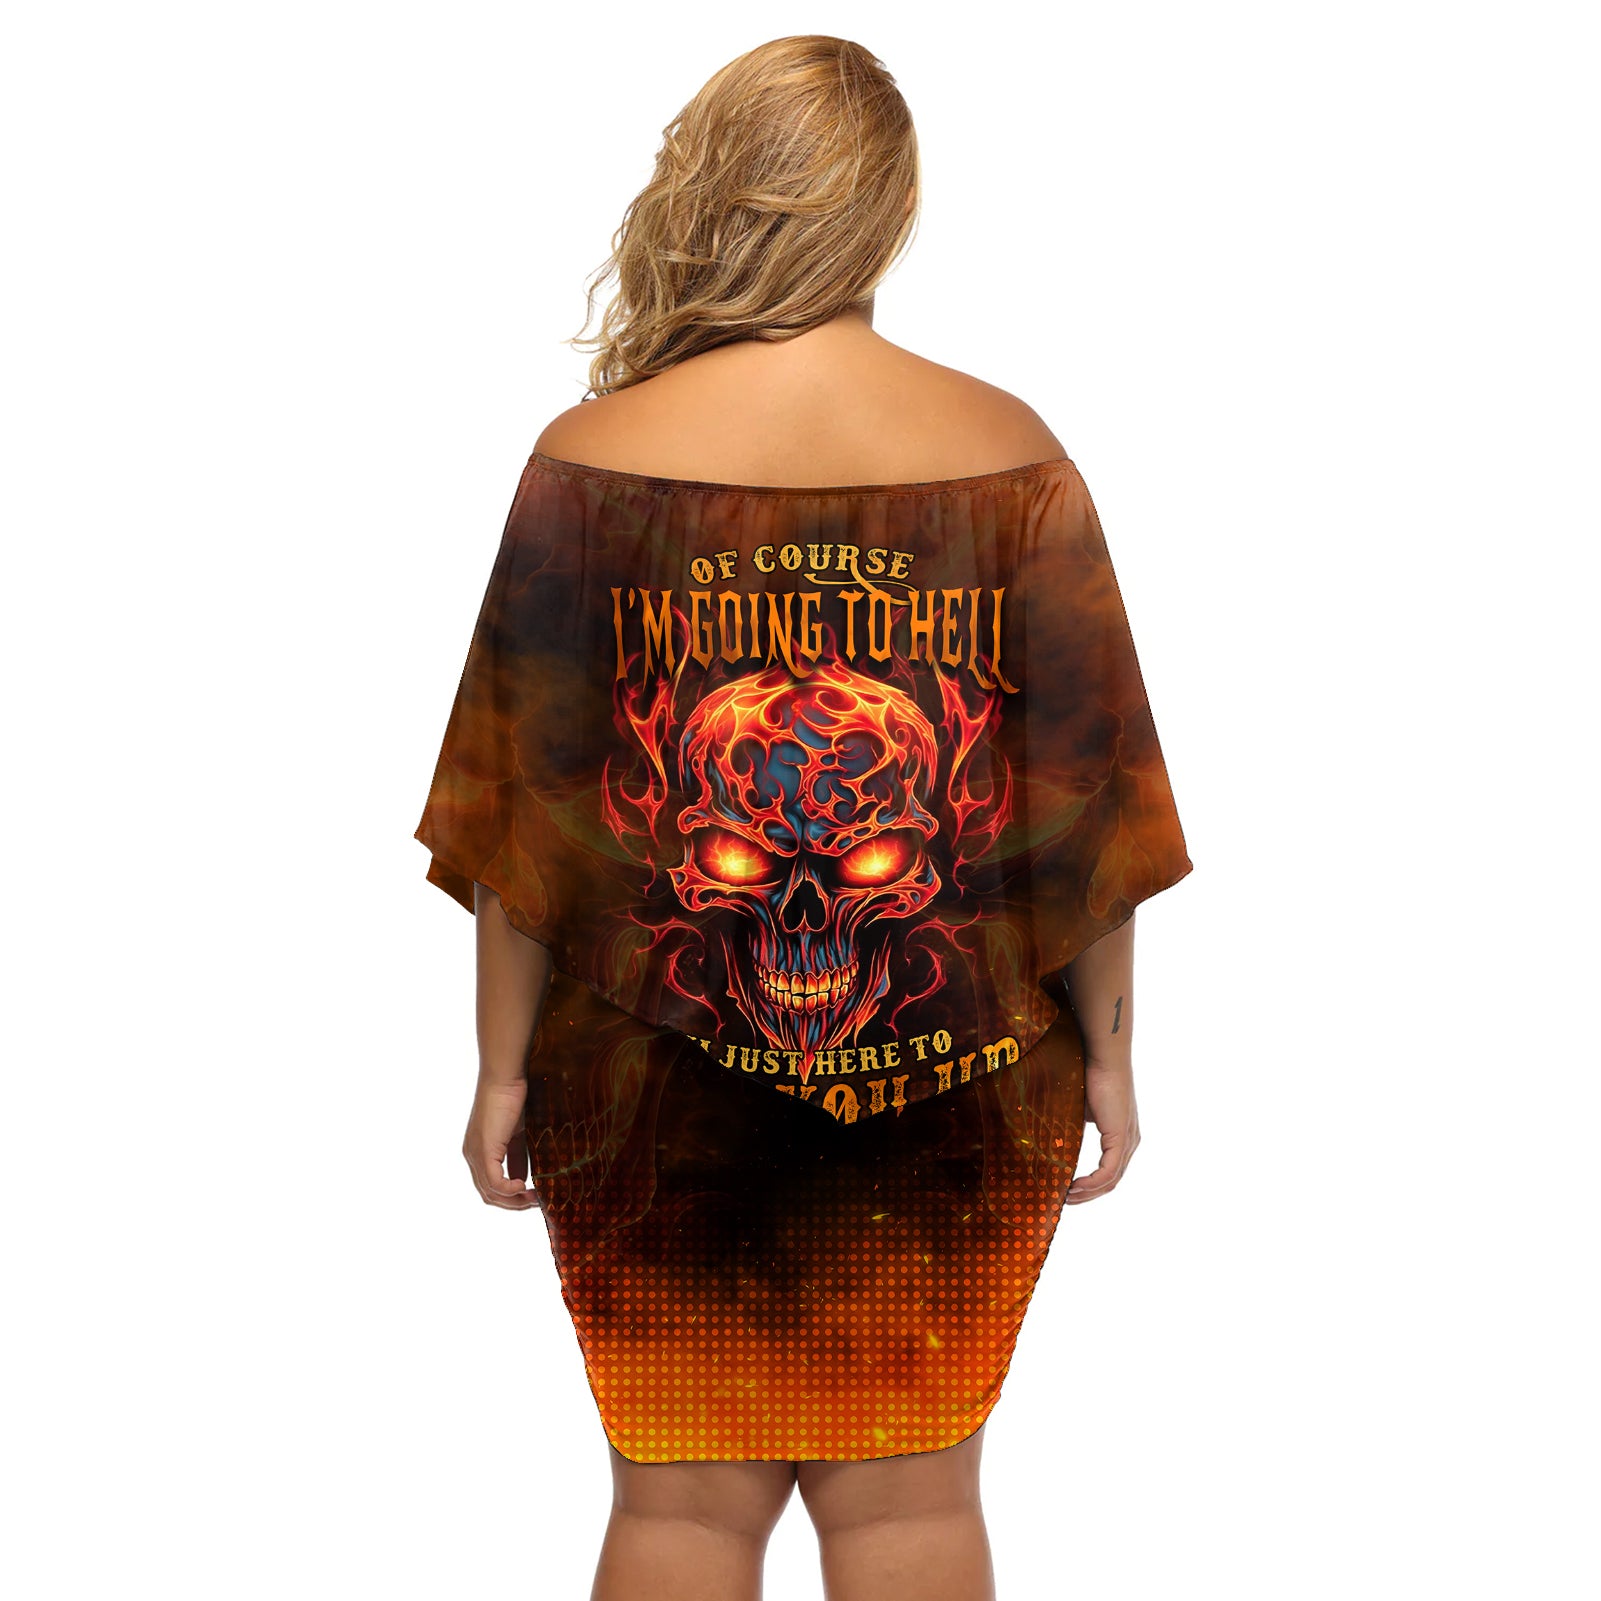 fire-skull-off-shoulder-short-dress-of-course-im-going-to-hell-im-just-here-to-pick-you-up